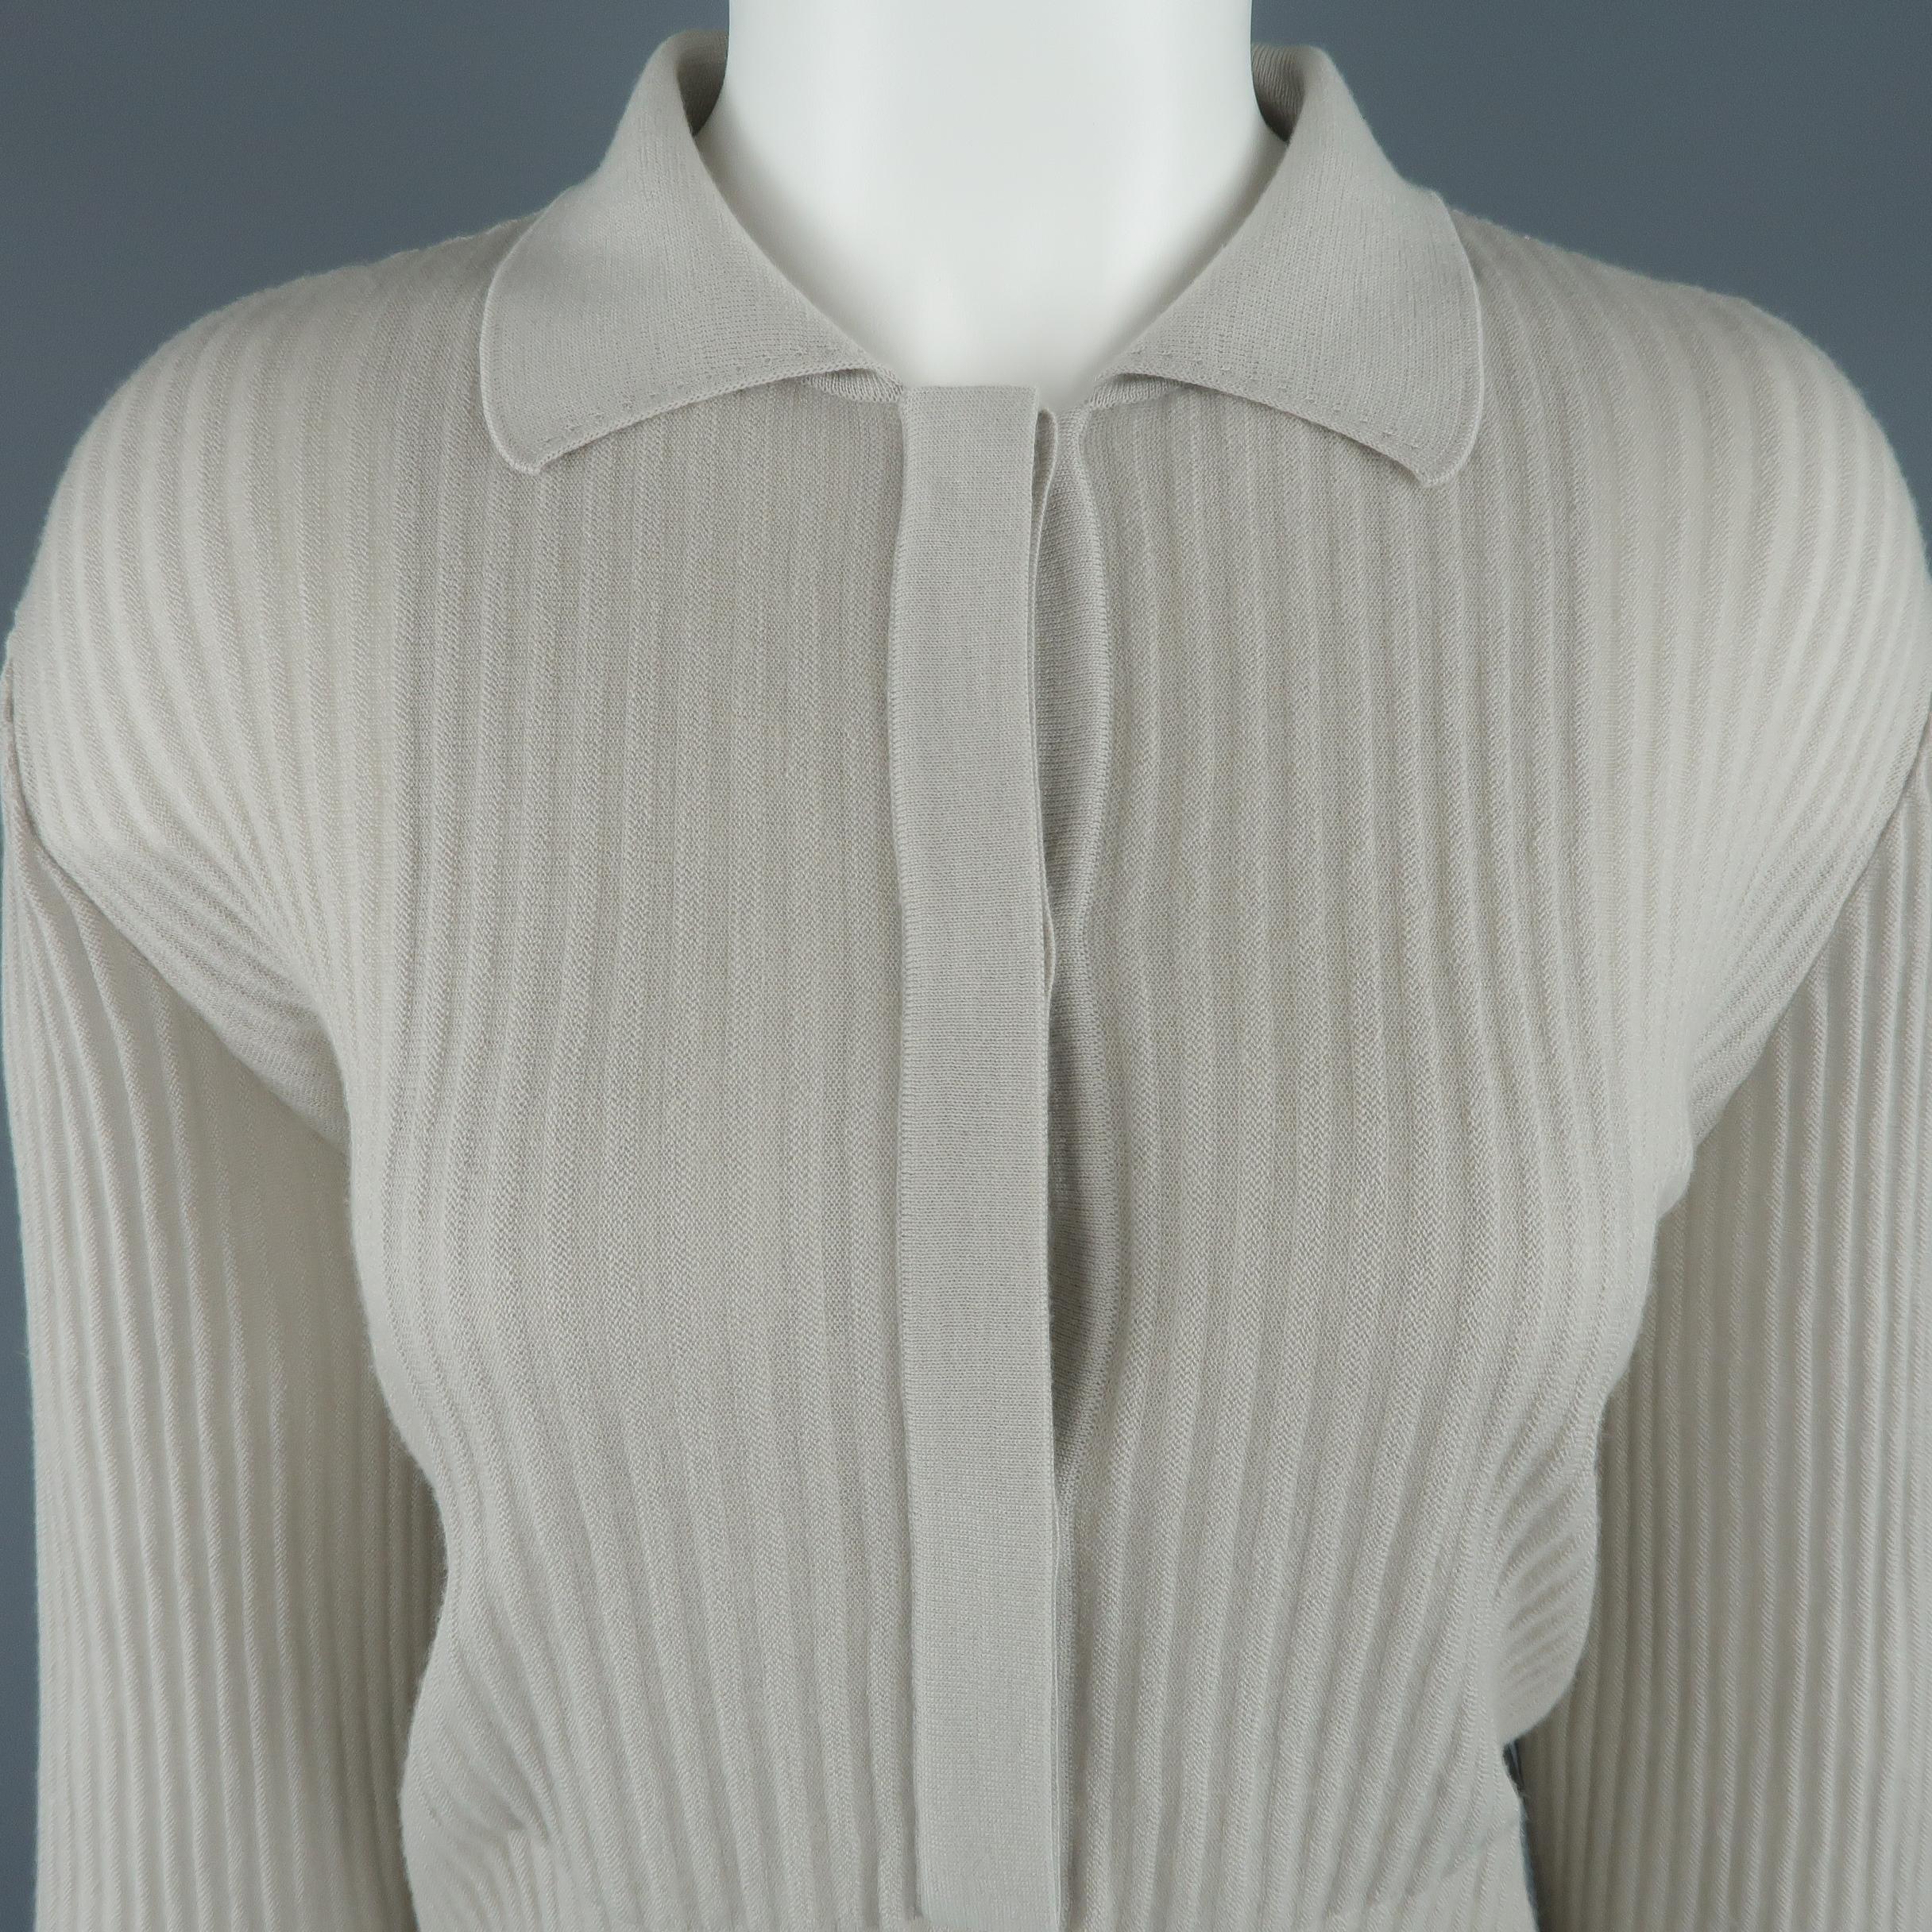 GIORGIO ARMANI pullover comes in sheer ribbed cashmere knit with a half button collared front. Made in Italy.
 
Excellent Pre-Owned Condition.
Marked: IT 46
 
Measurements:
 
Shoulder: 16 in.
Bust: 40 in.
Sleeve: 24 in.
Length: 26 in.